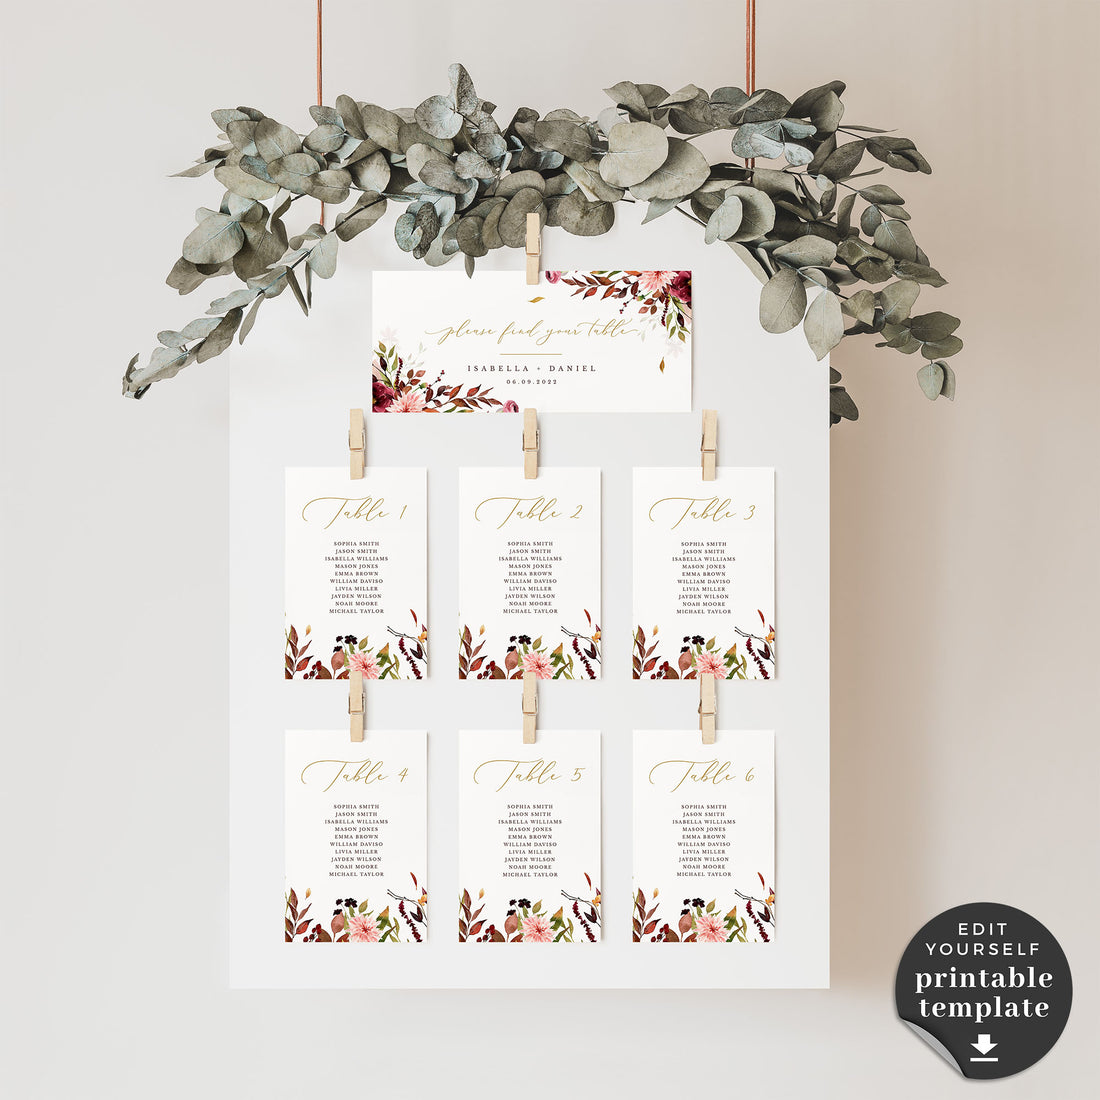 Ambra | Printable Seating Cards for Autumn Wedding